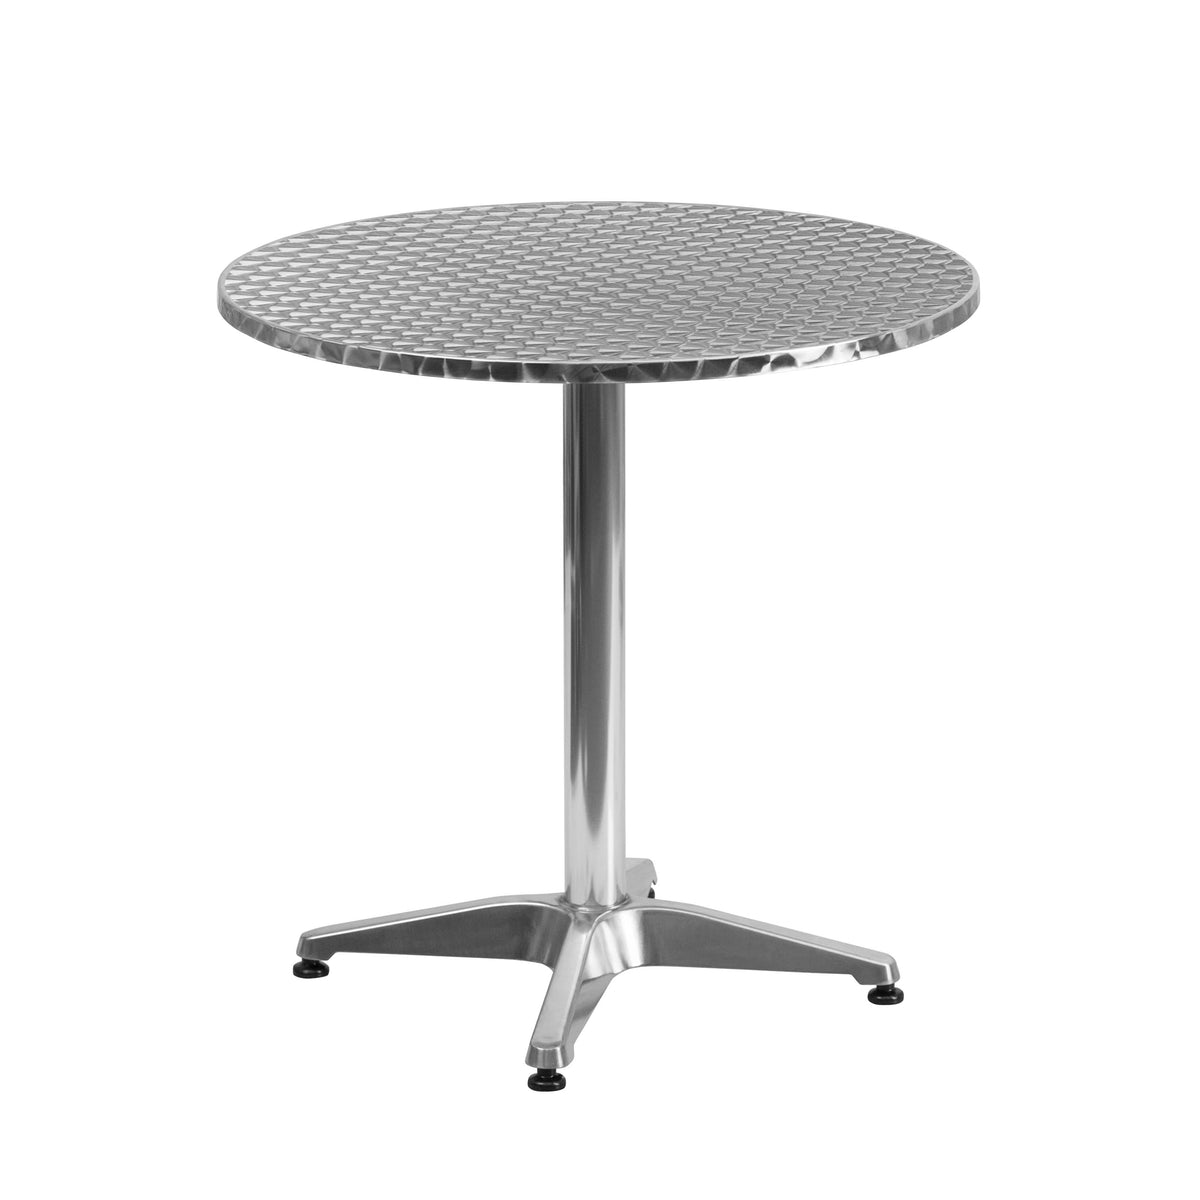 27.5inch Round Aluminum Indoor-Outdoor Table Set with 4 Slat Back Chairs